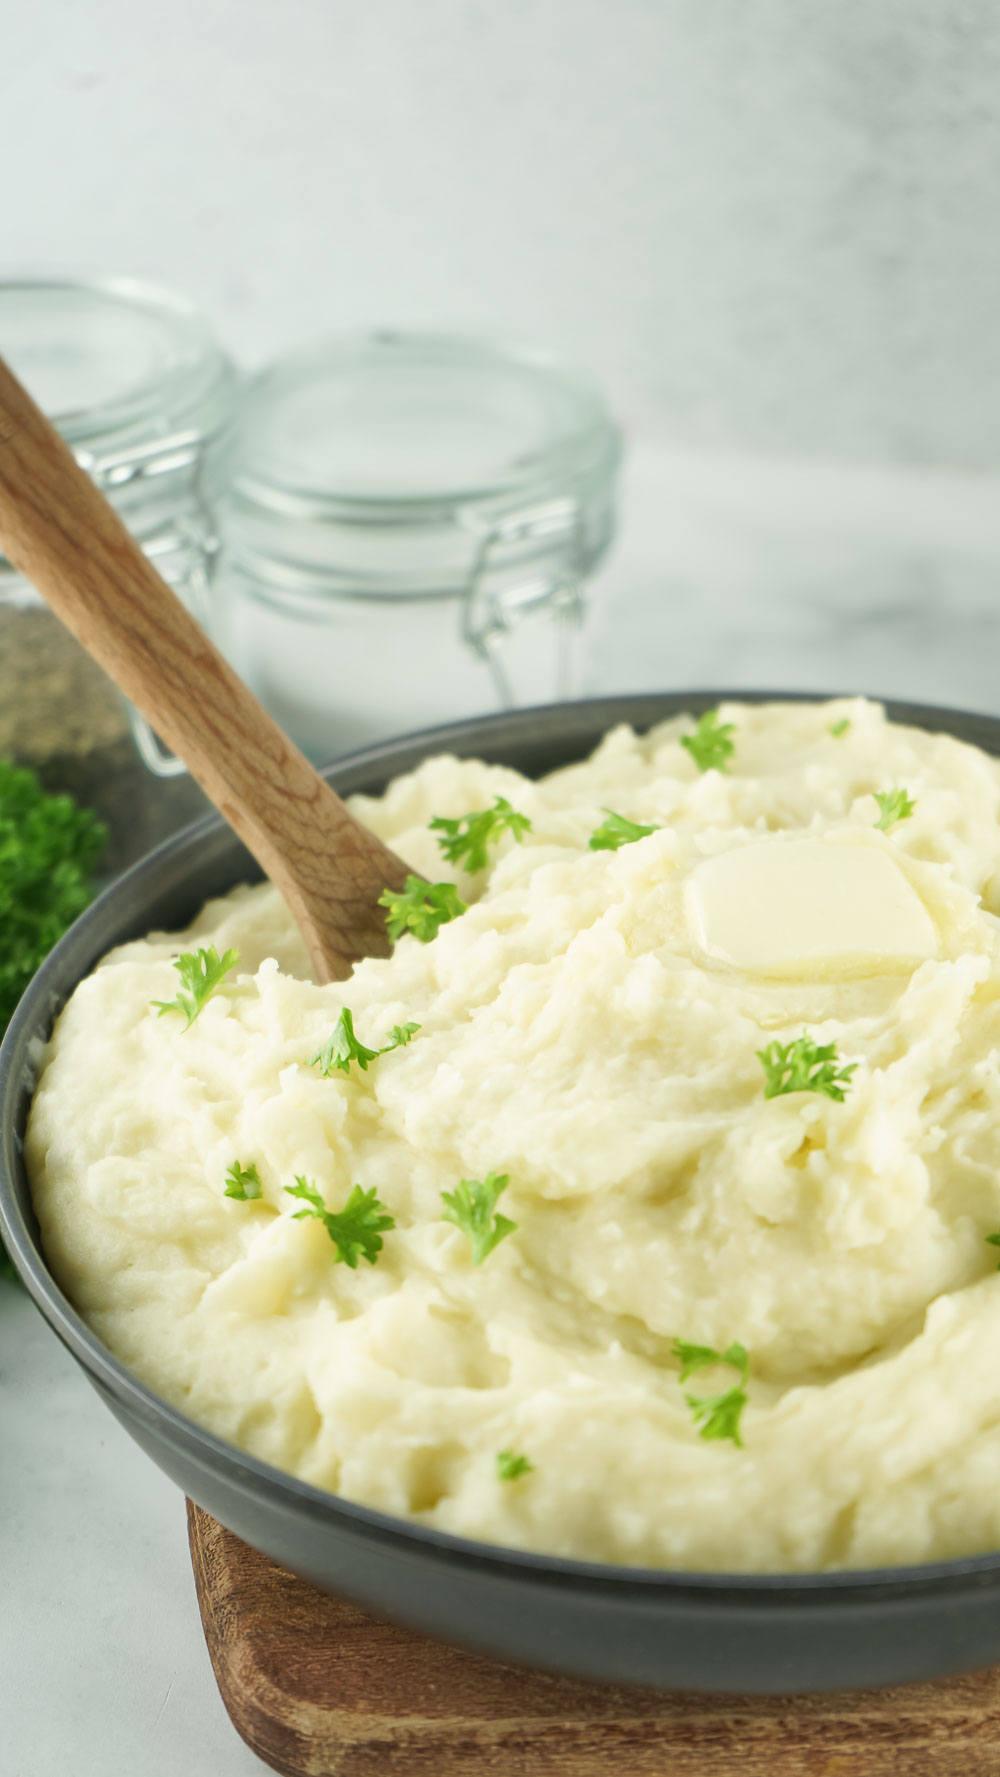 These Instant Pot russet mashed potatoes are perfectly rich and creamy, easy to make, and always a crowd fave! Learn how to make it in under 30 minutes.